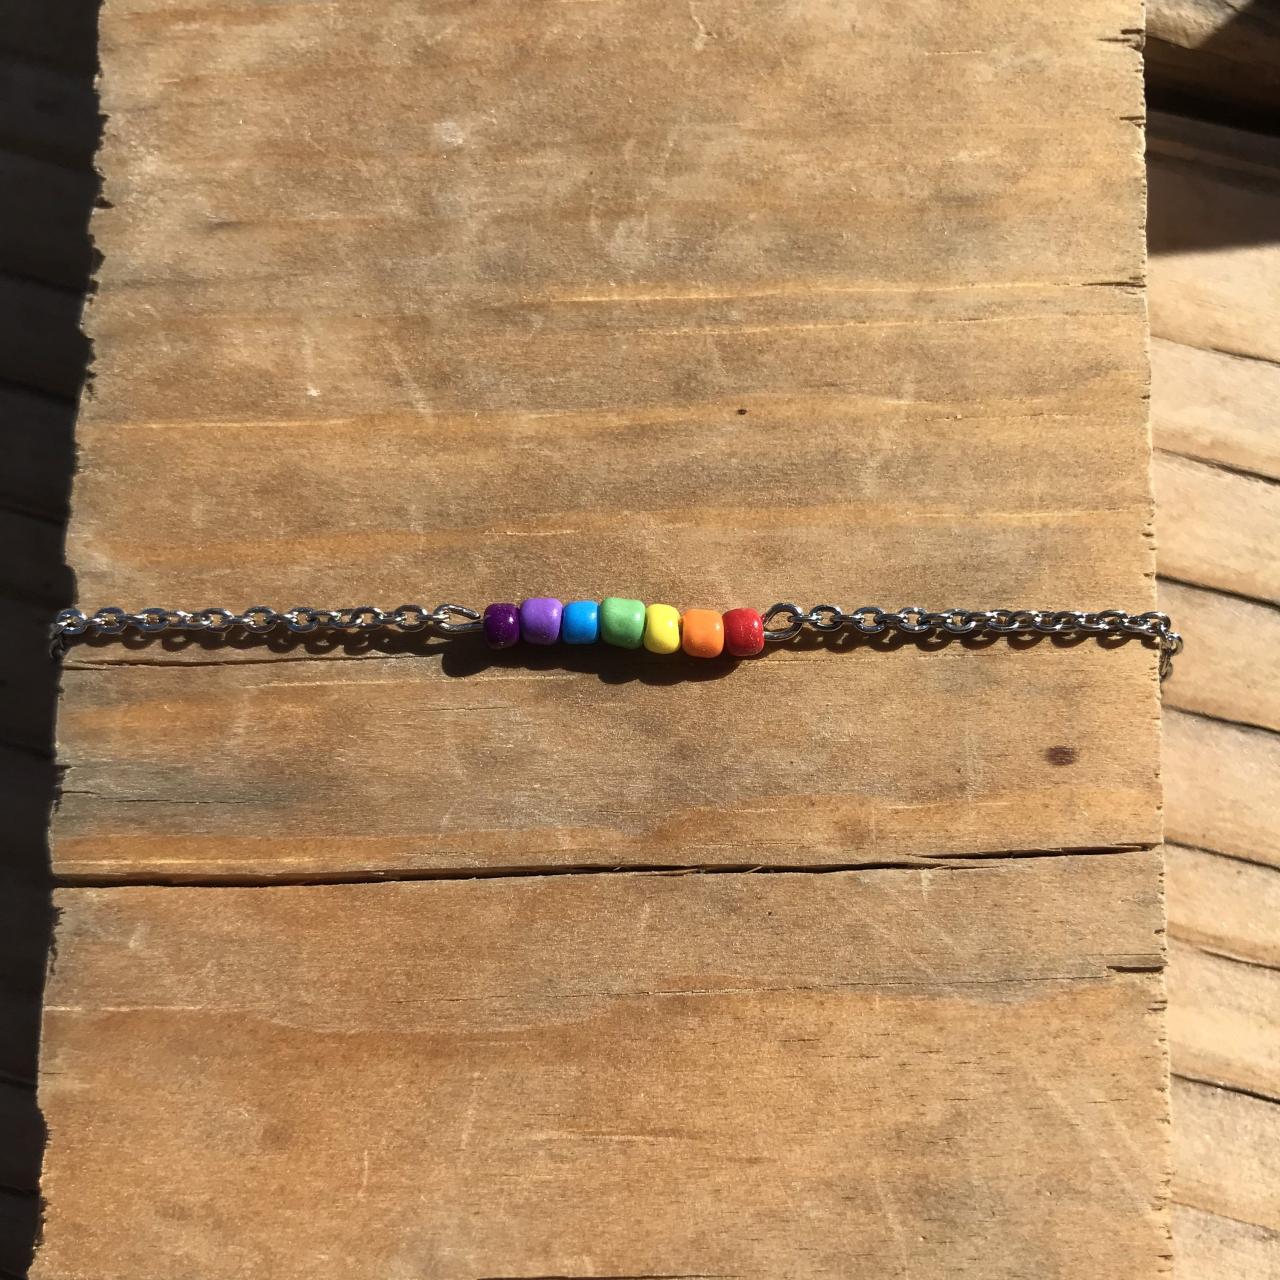 Pride Bracelet, Rainbow Jewelry, Anklet, Pride, Rainbow With Steel Chain And Lobster Claw, Love Is Love, Colorful, Lgbtq